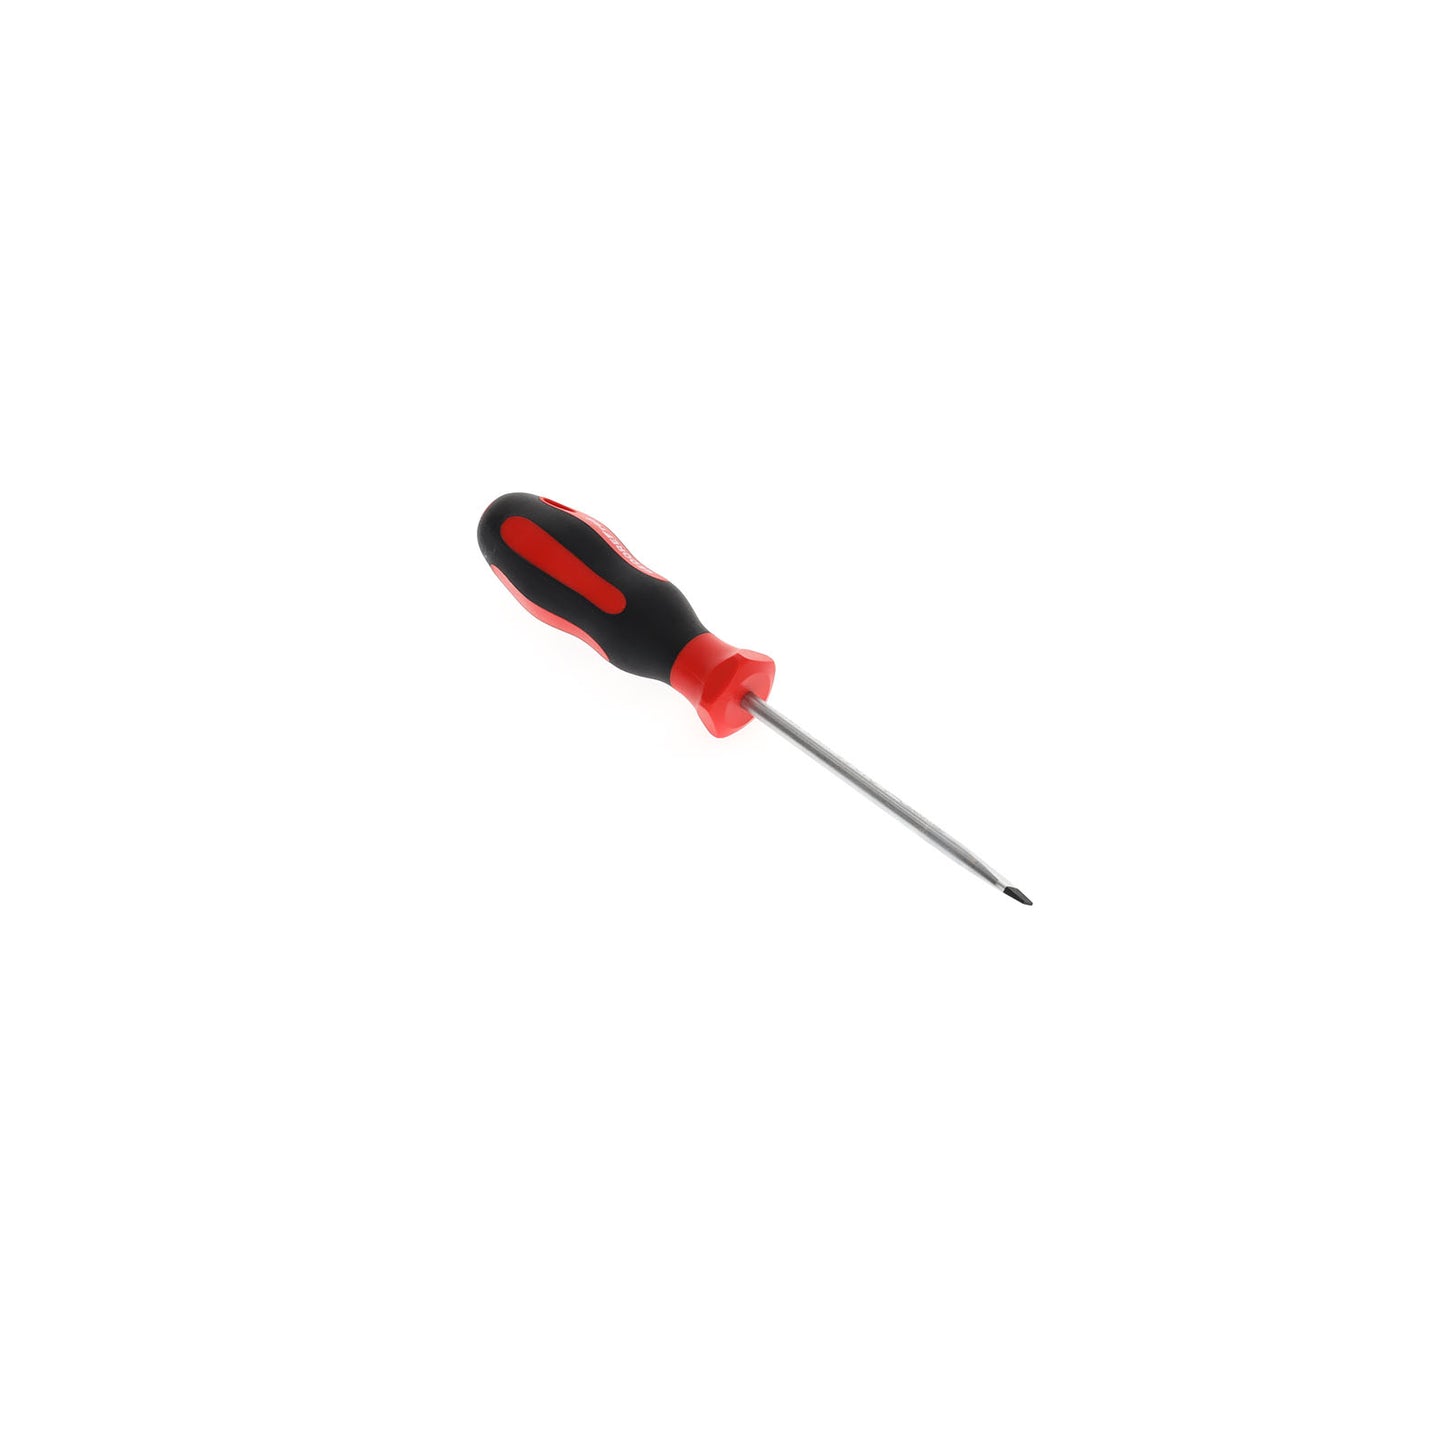 GEDORE red R38105519 - Flat tip screwdriver, 5.5 mm (3301228)